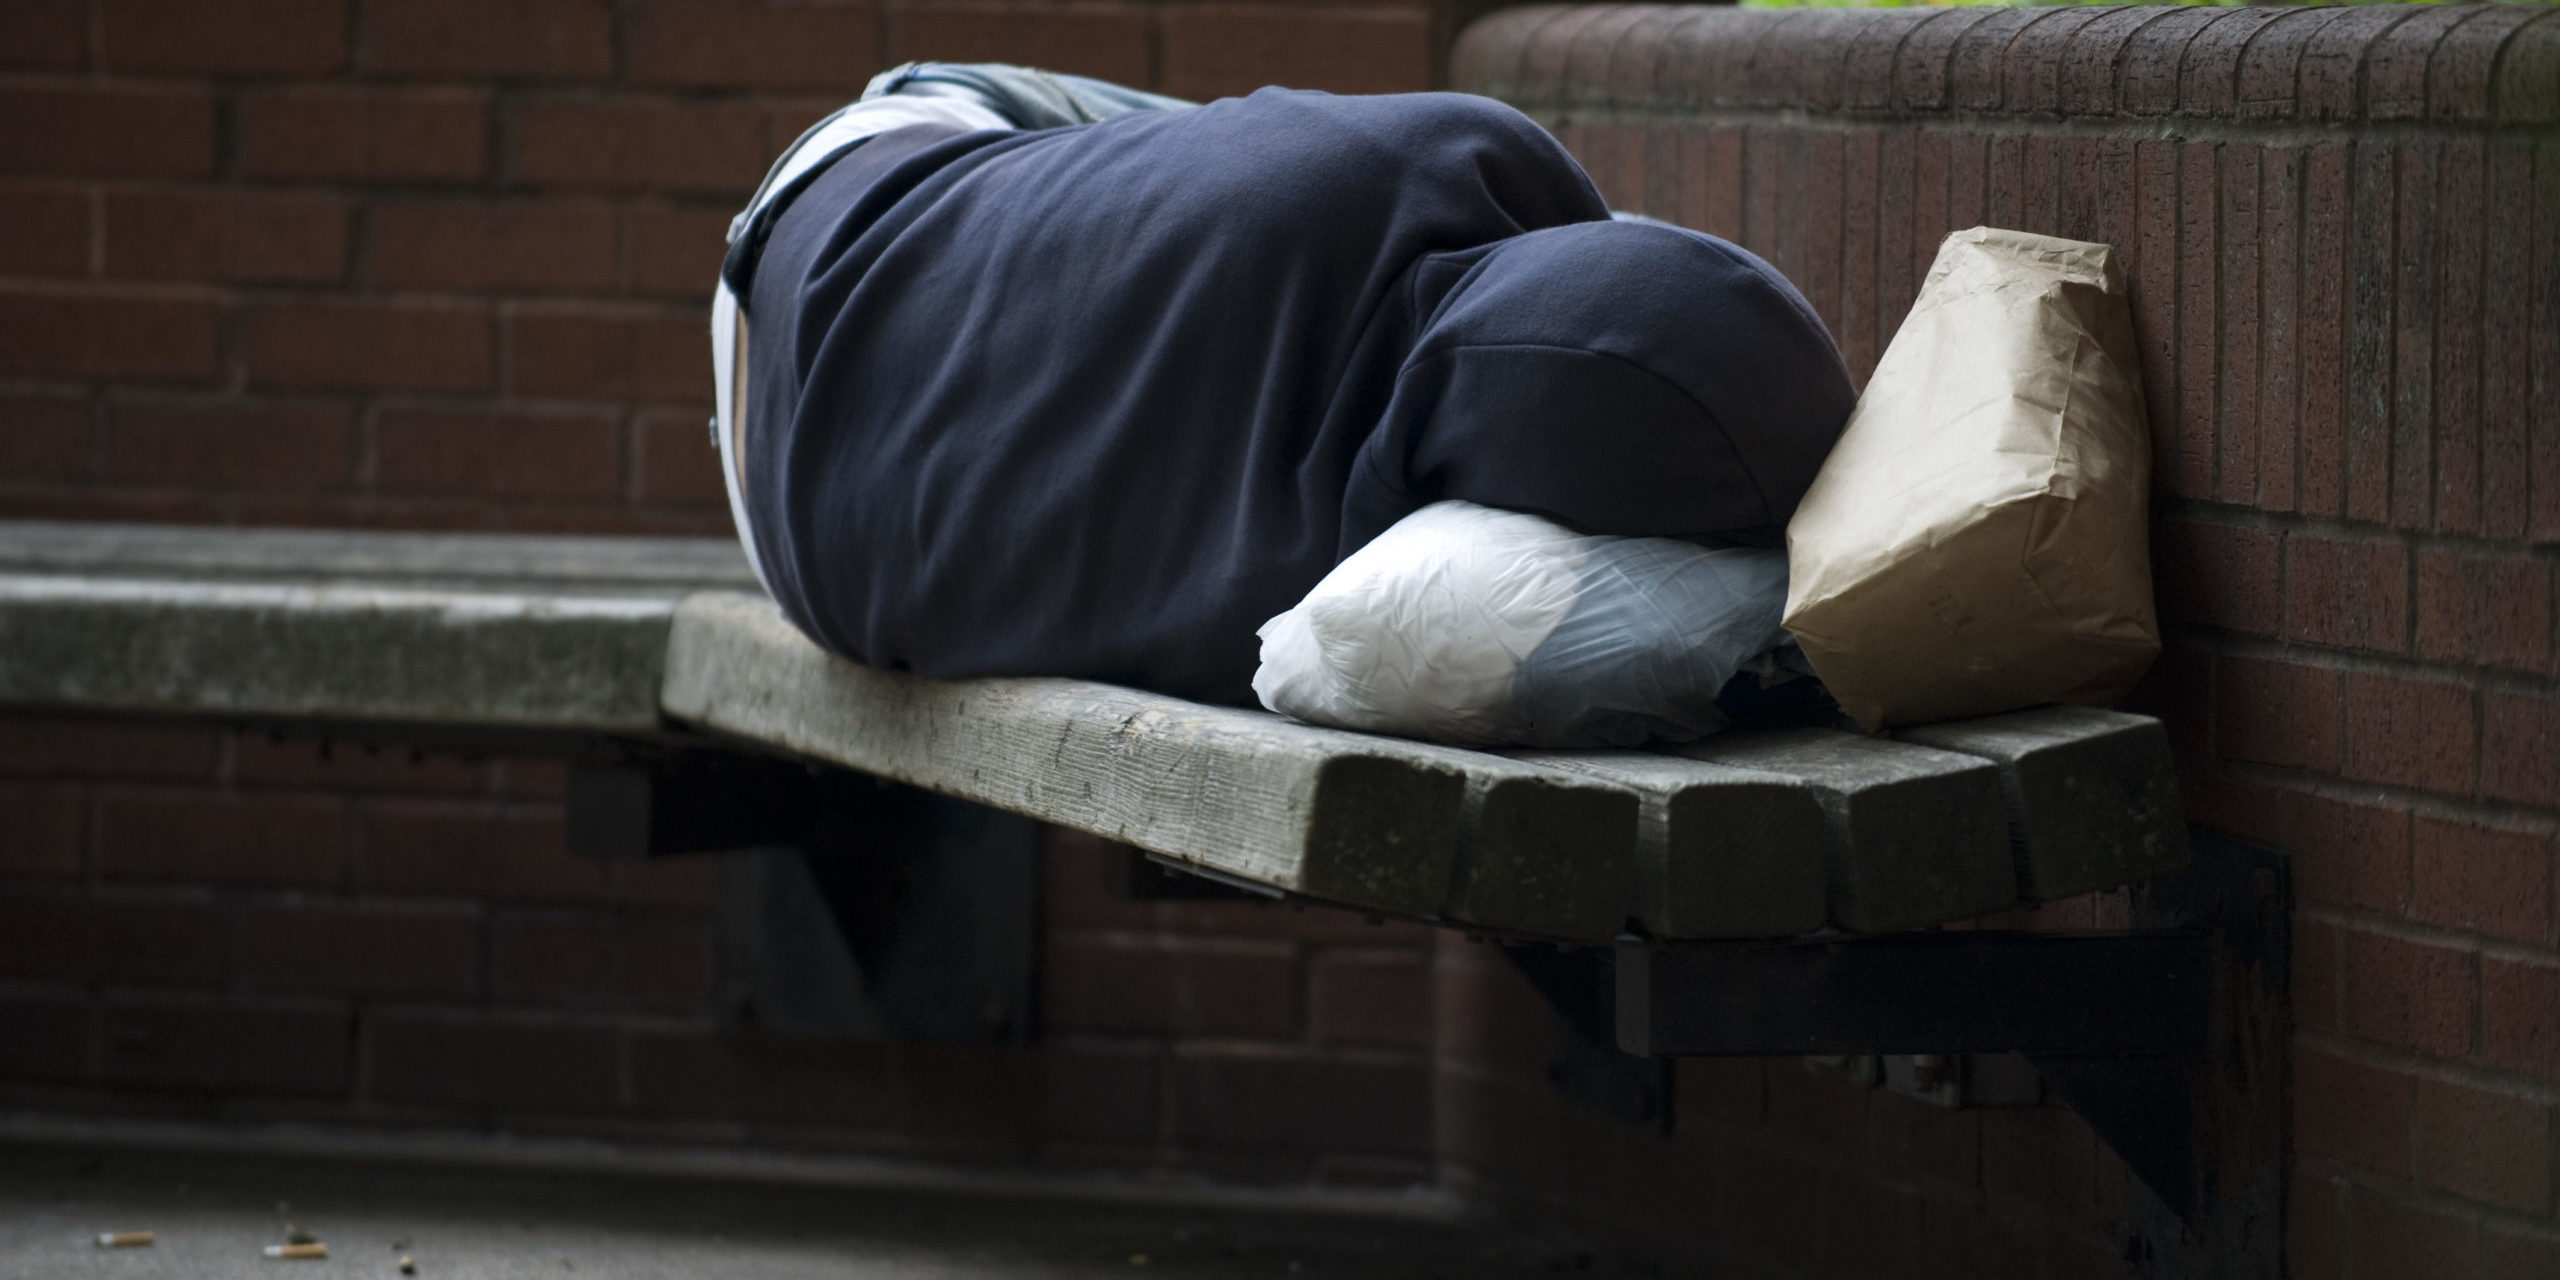 LifePath focuses on mental health in new approach to addressing homelessness